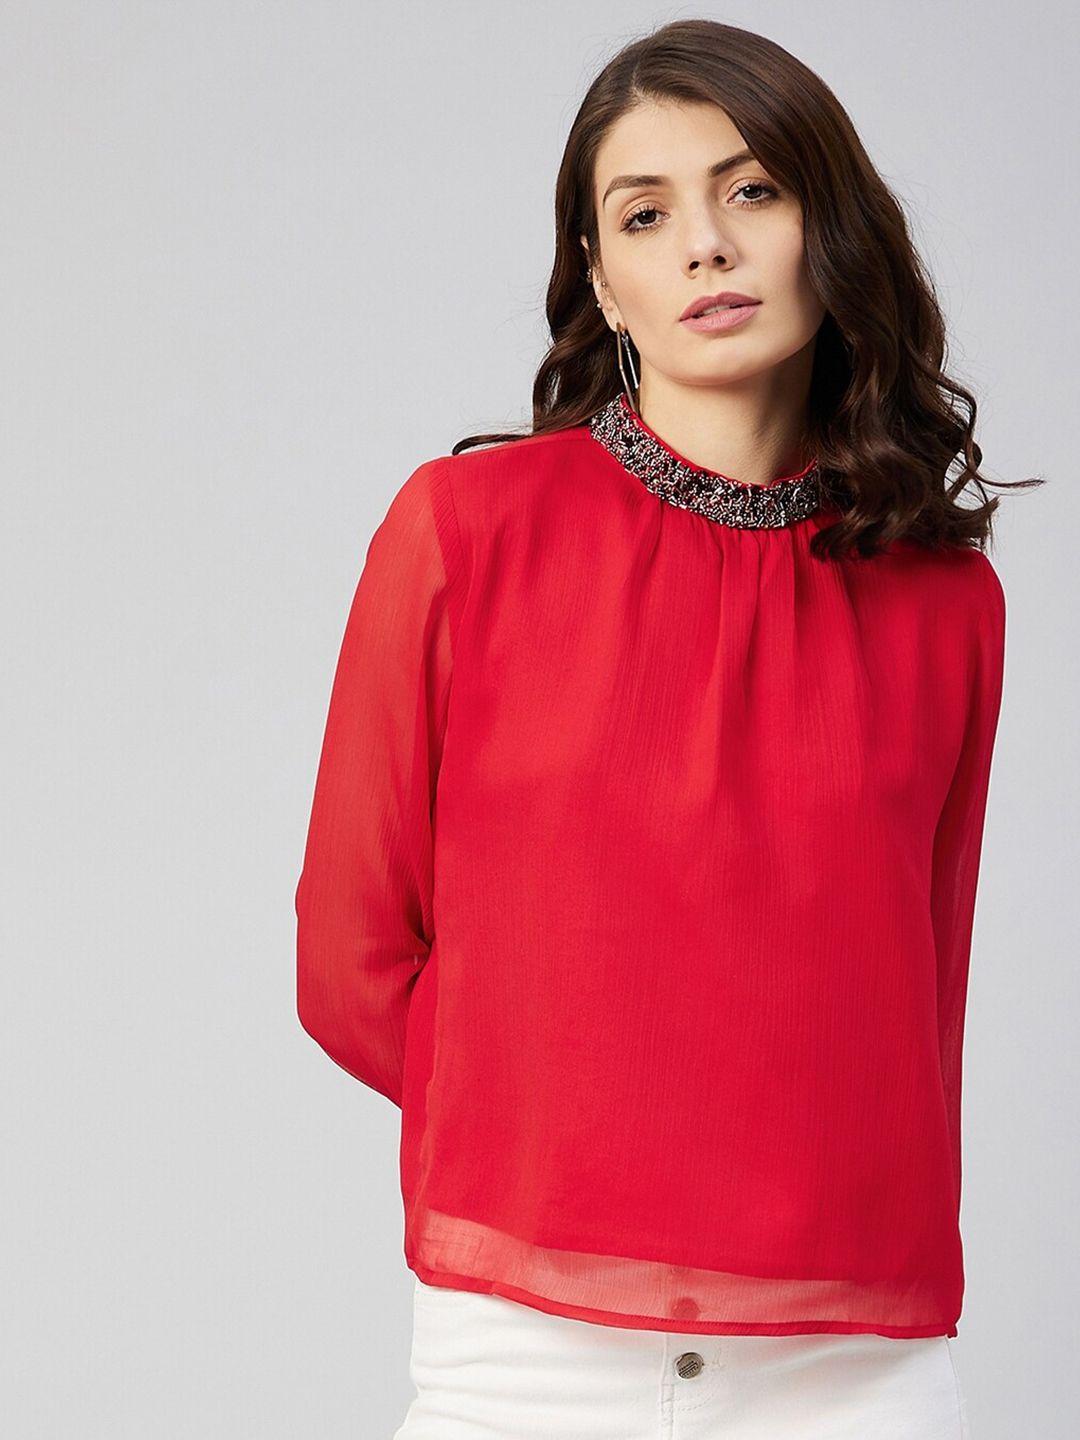 marie claire women red chiffon jewel neck top